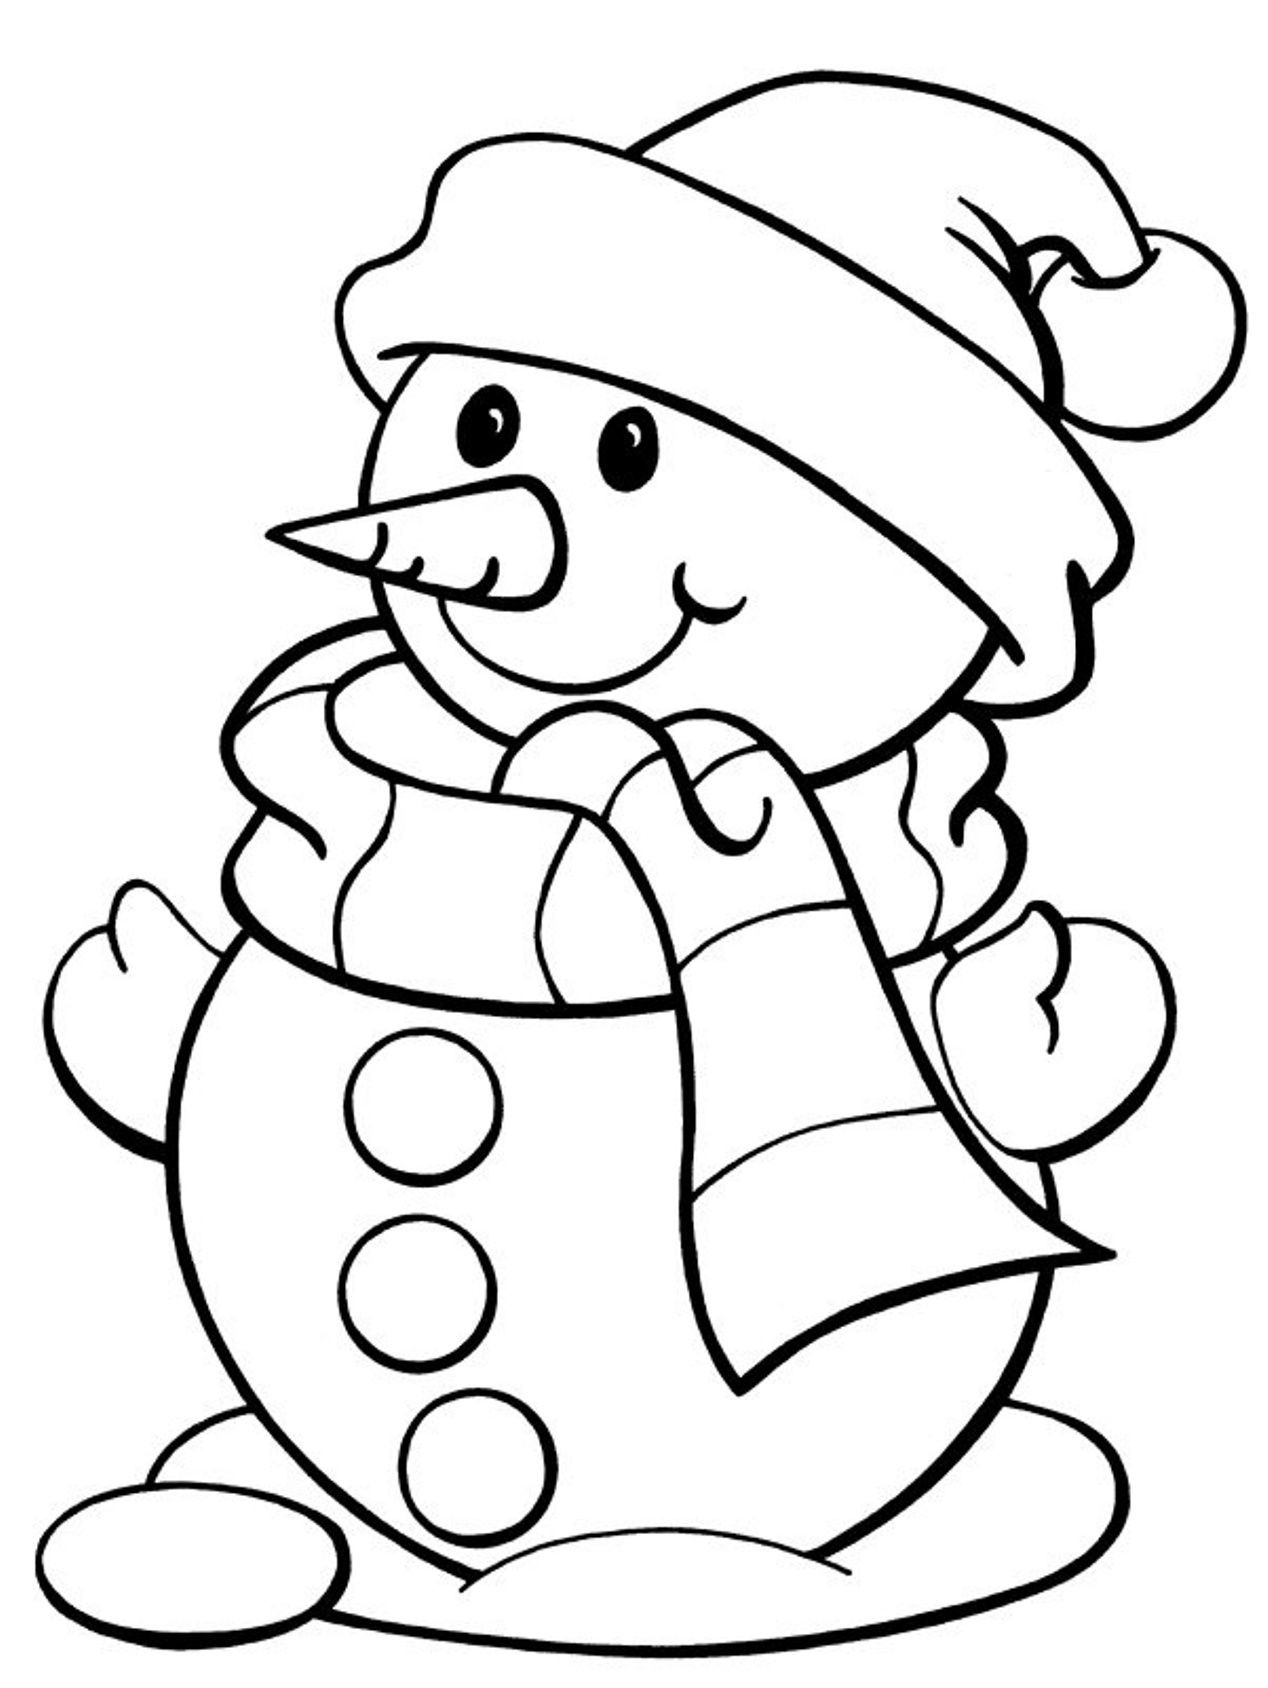 Winter Coloring Sheets For Kids
 winter coloring pages Google Search